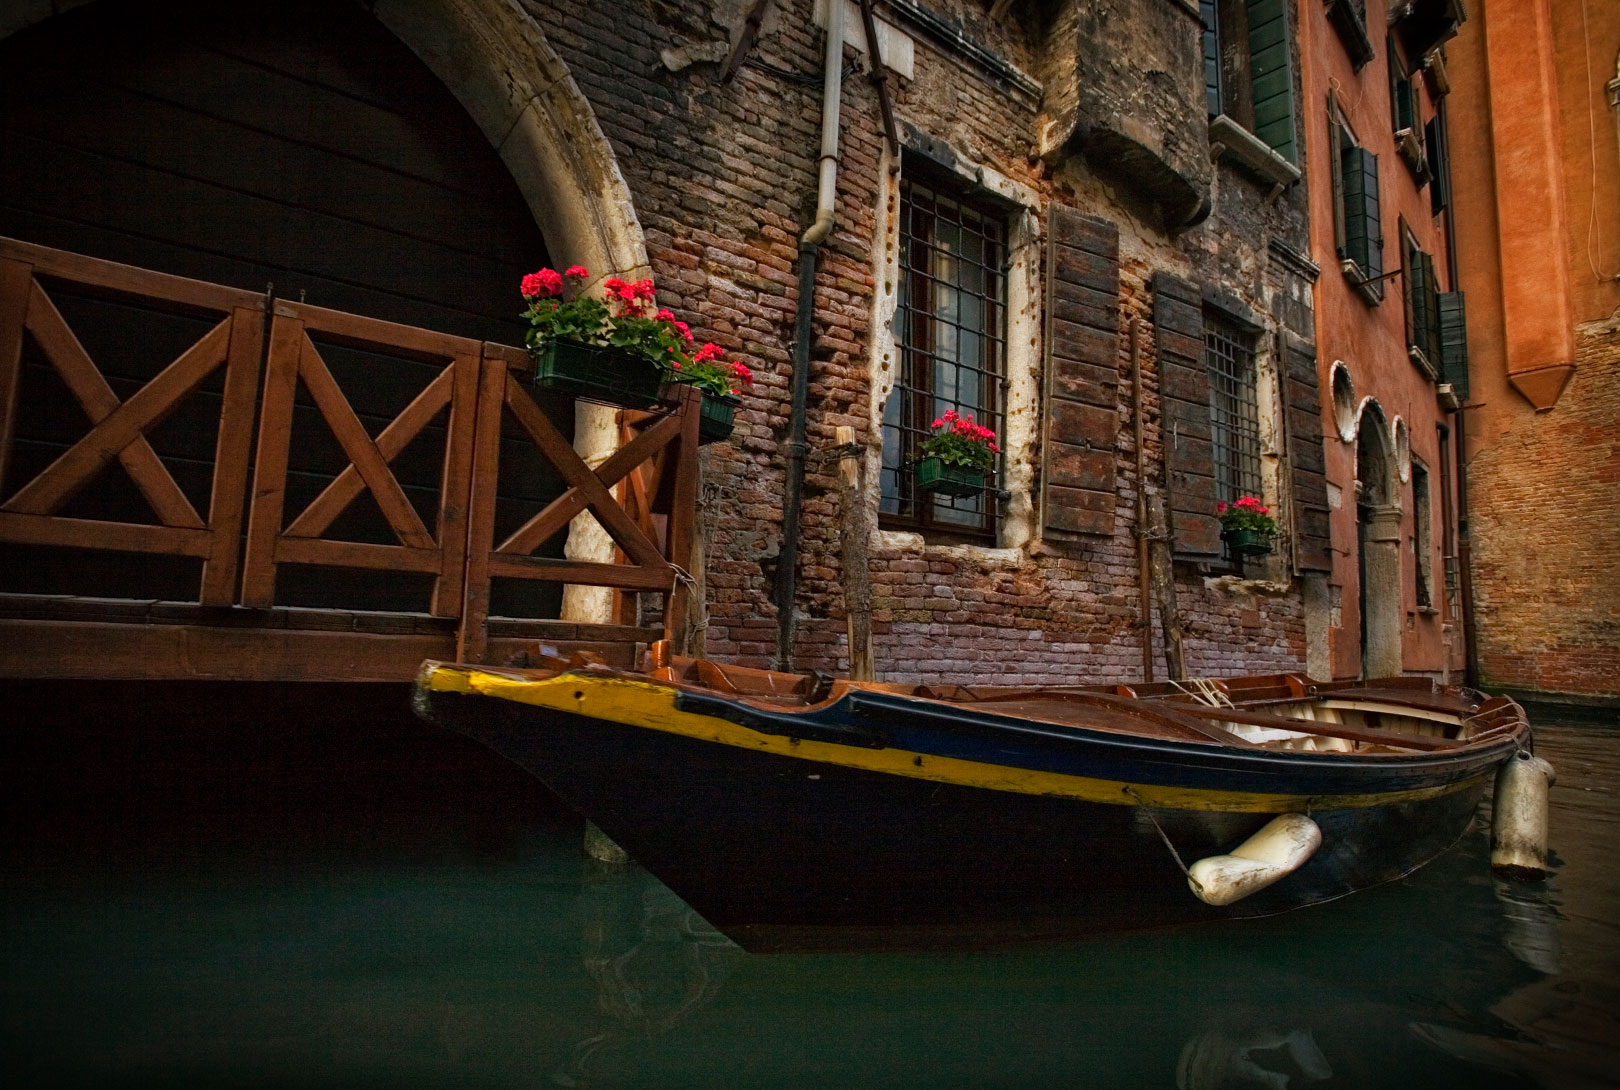 wooden boat with yellow trim tied to a brick building with red flowers in canal Venice Italy